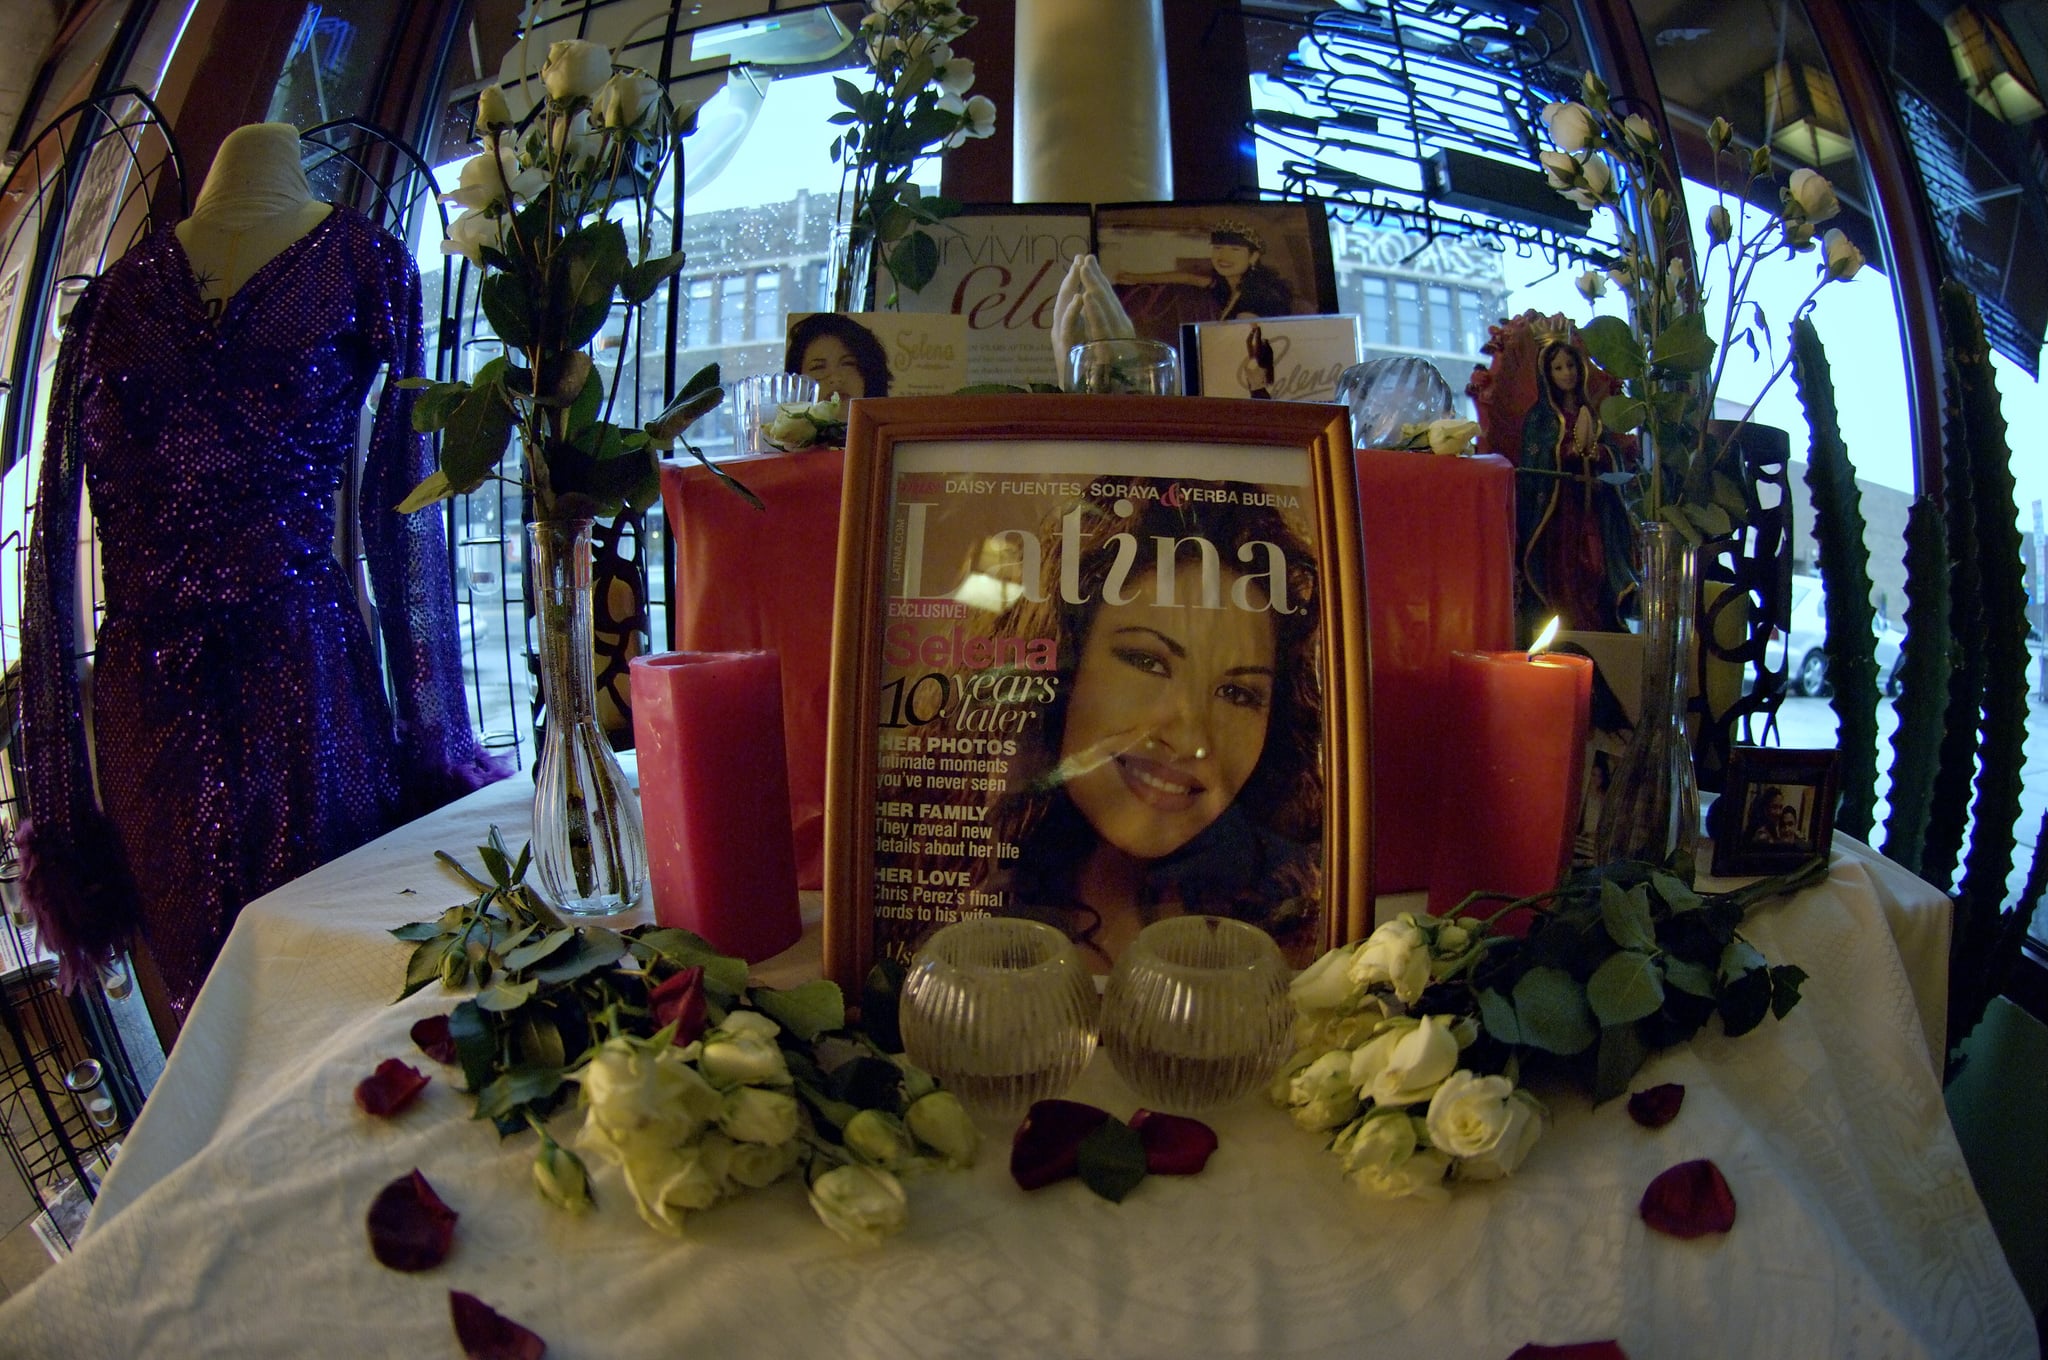 David Brewster / Star Tribune Wednesday_03/30/05_Mpls - - - - - - -  Thursday marks the 10th anniversary of Tejano singer Selena's murder. El Nuevo Rodeo has set up an 